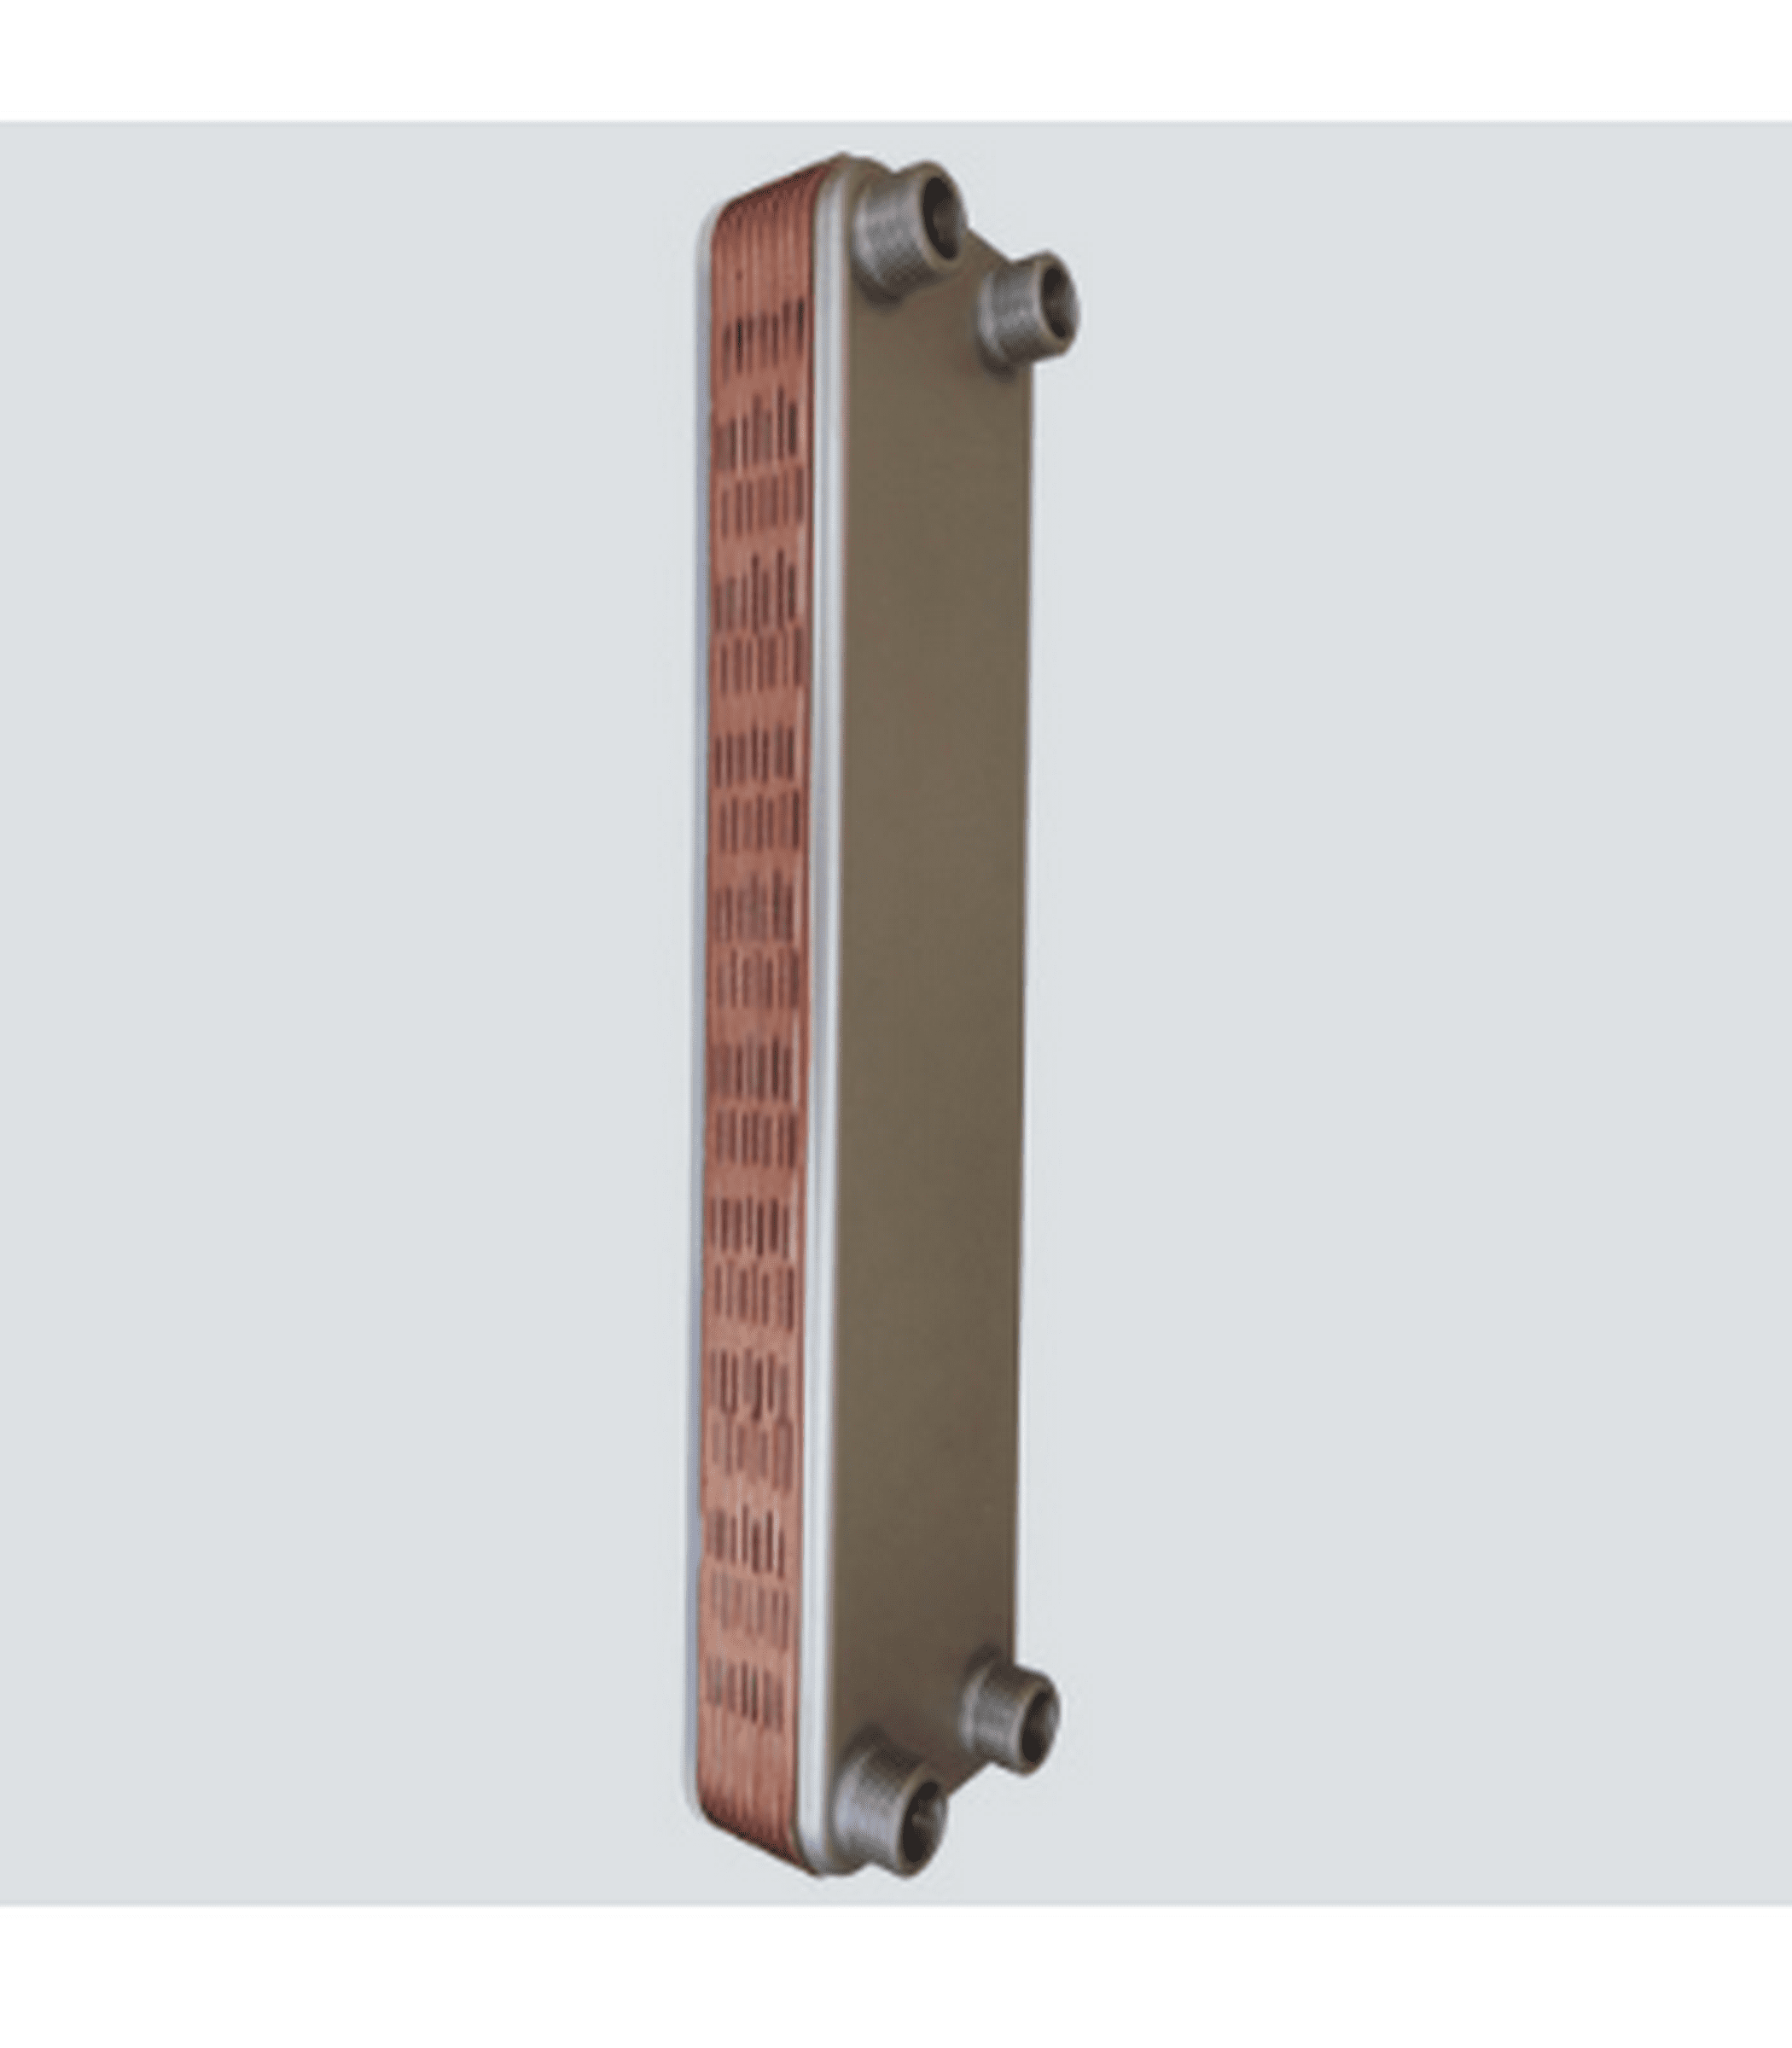 kelvion-double-wall-safety-heat-exchanger-for-better-protection